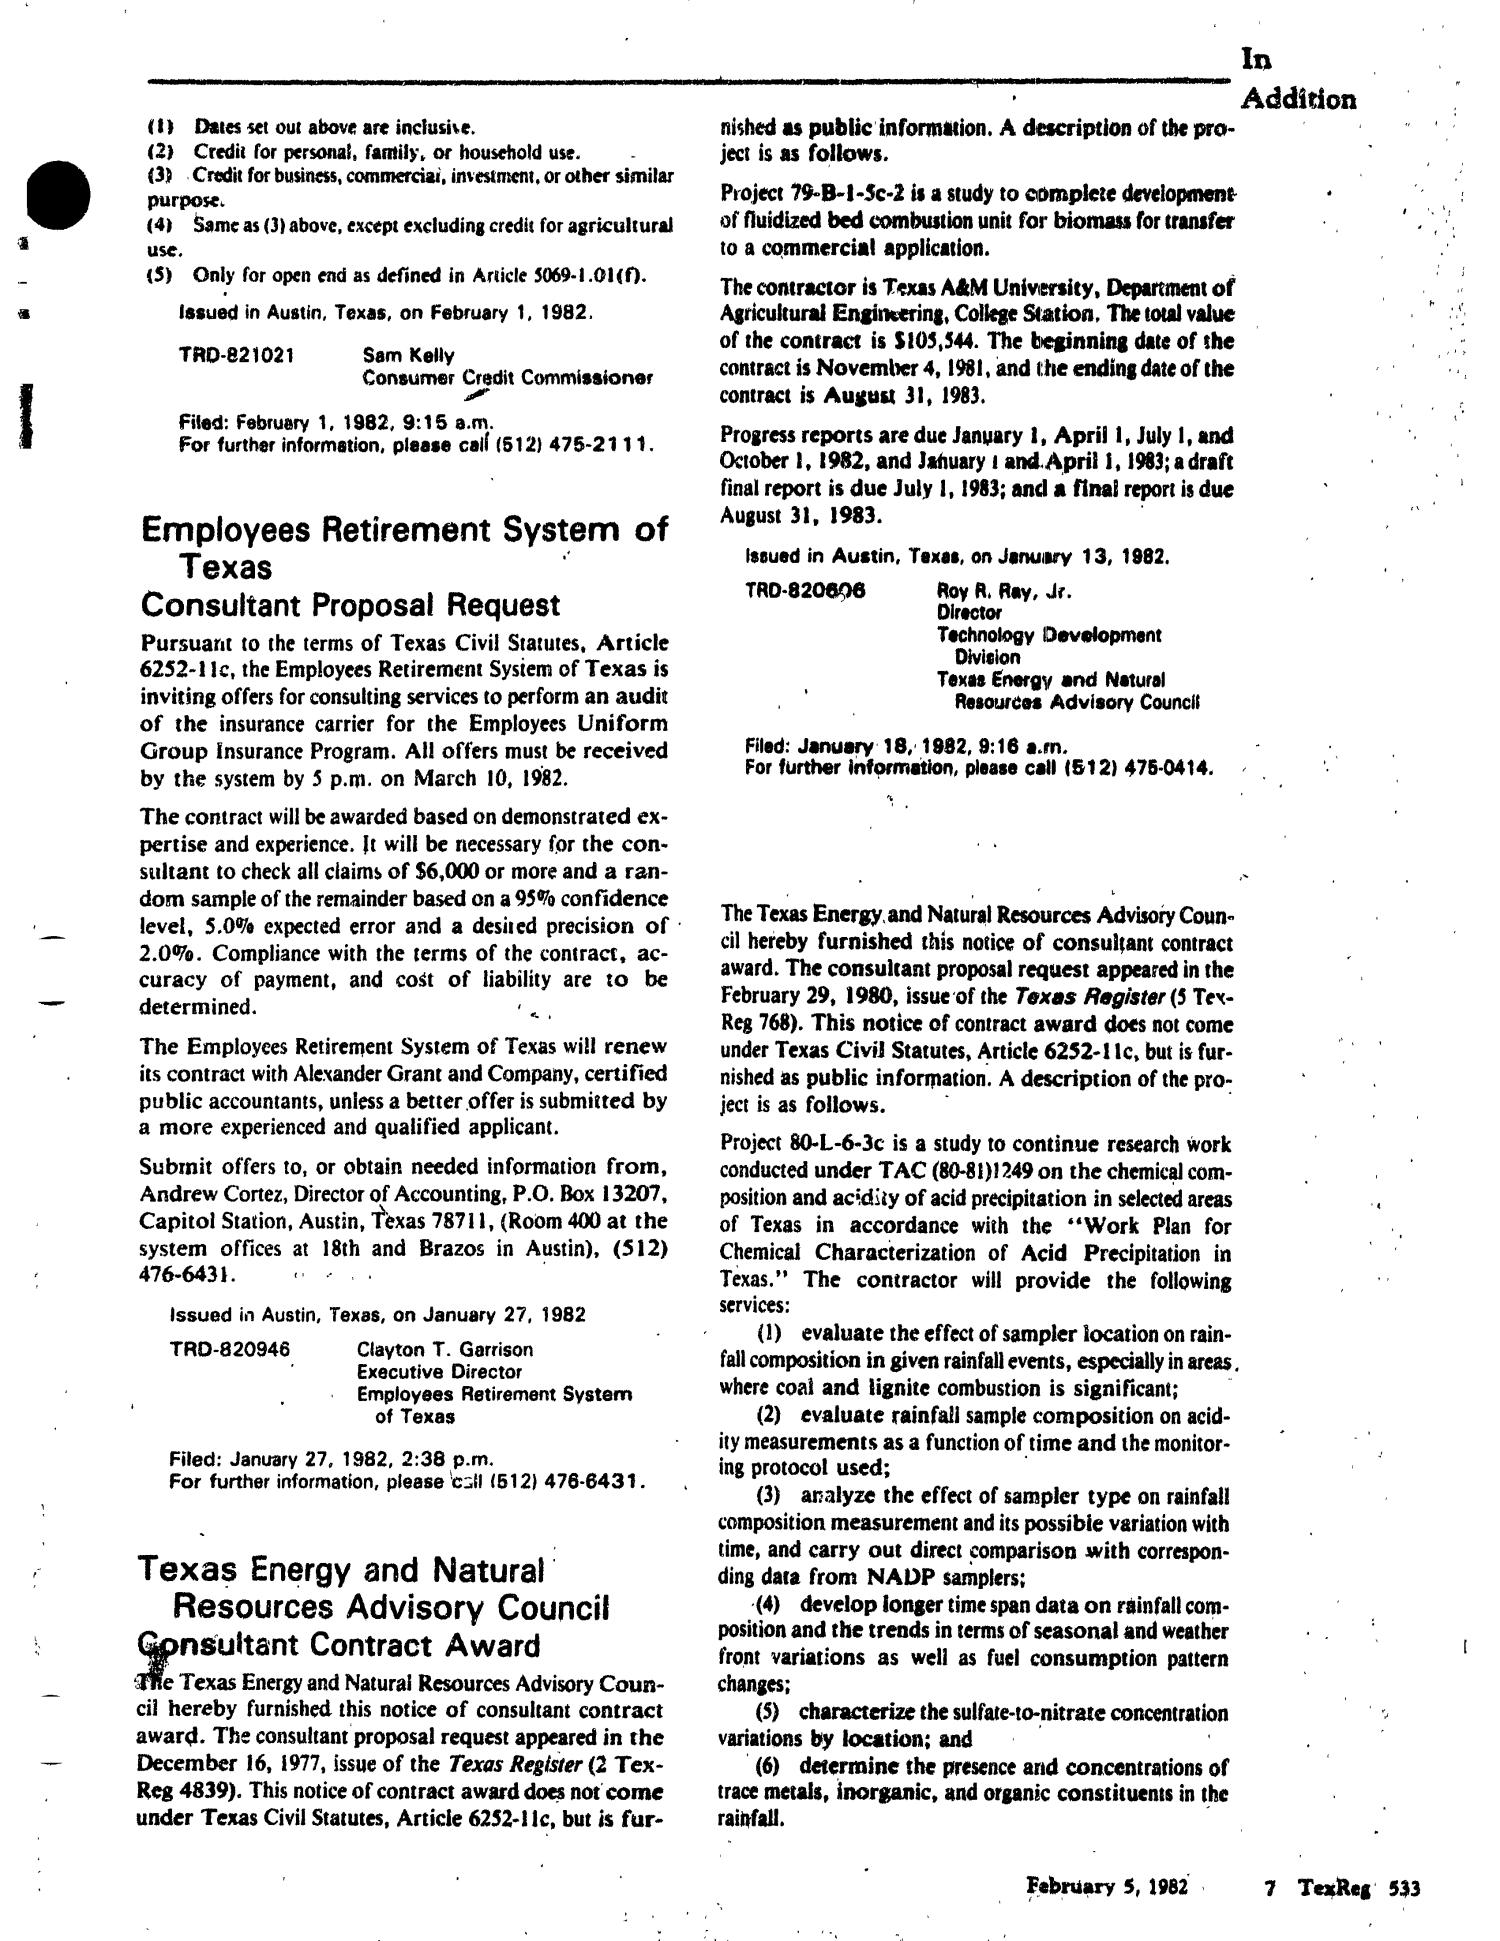 Texas Register, Volume 7, Number 8, Pages 469-554, February 5, 1982
                                                
                                                    533
                                                